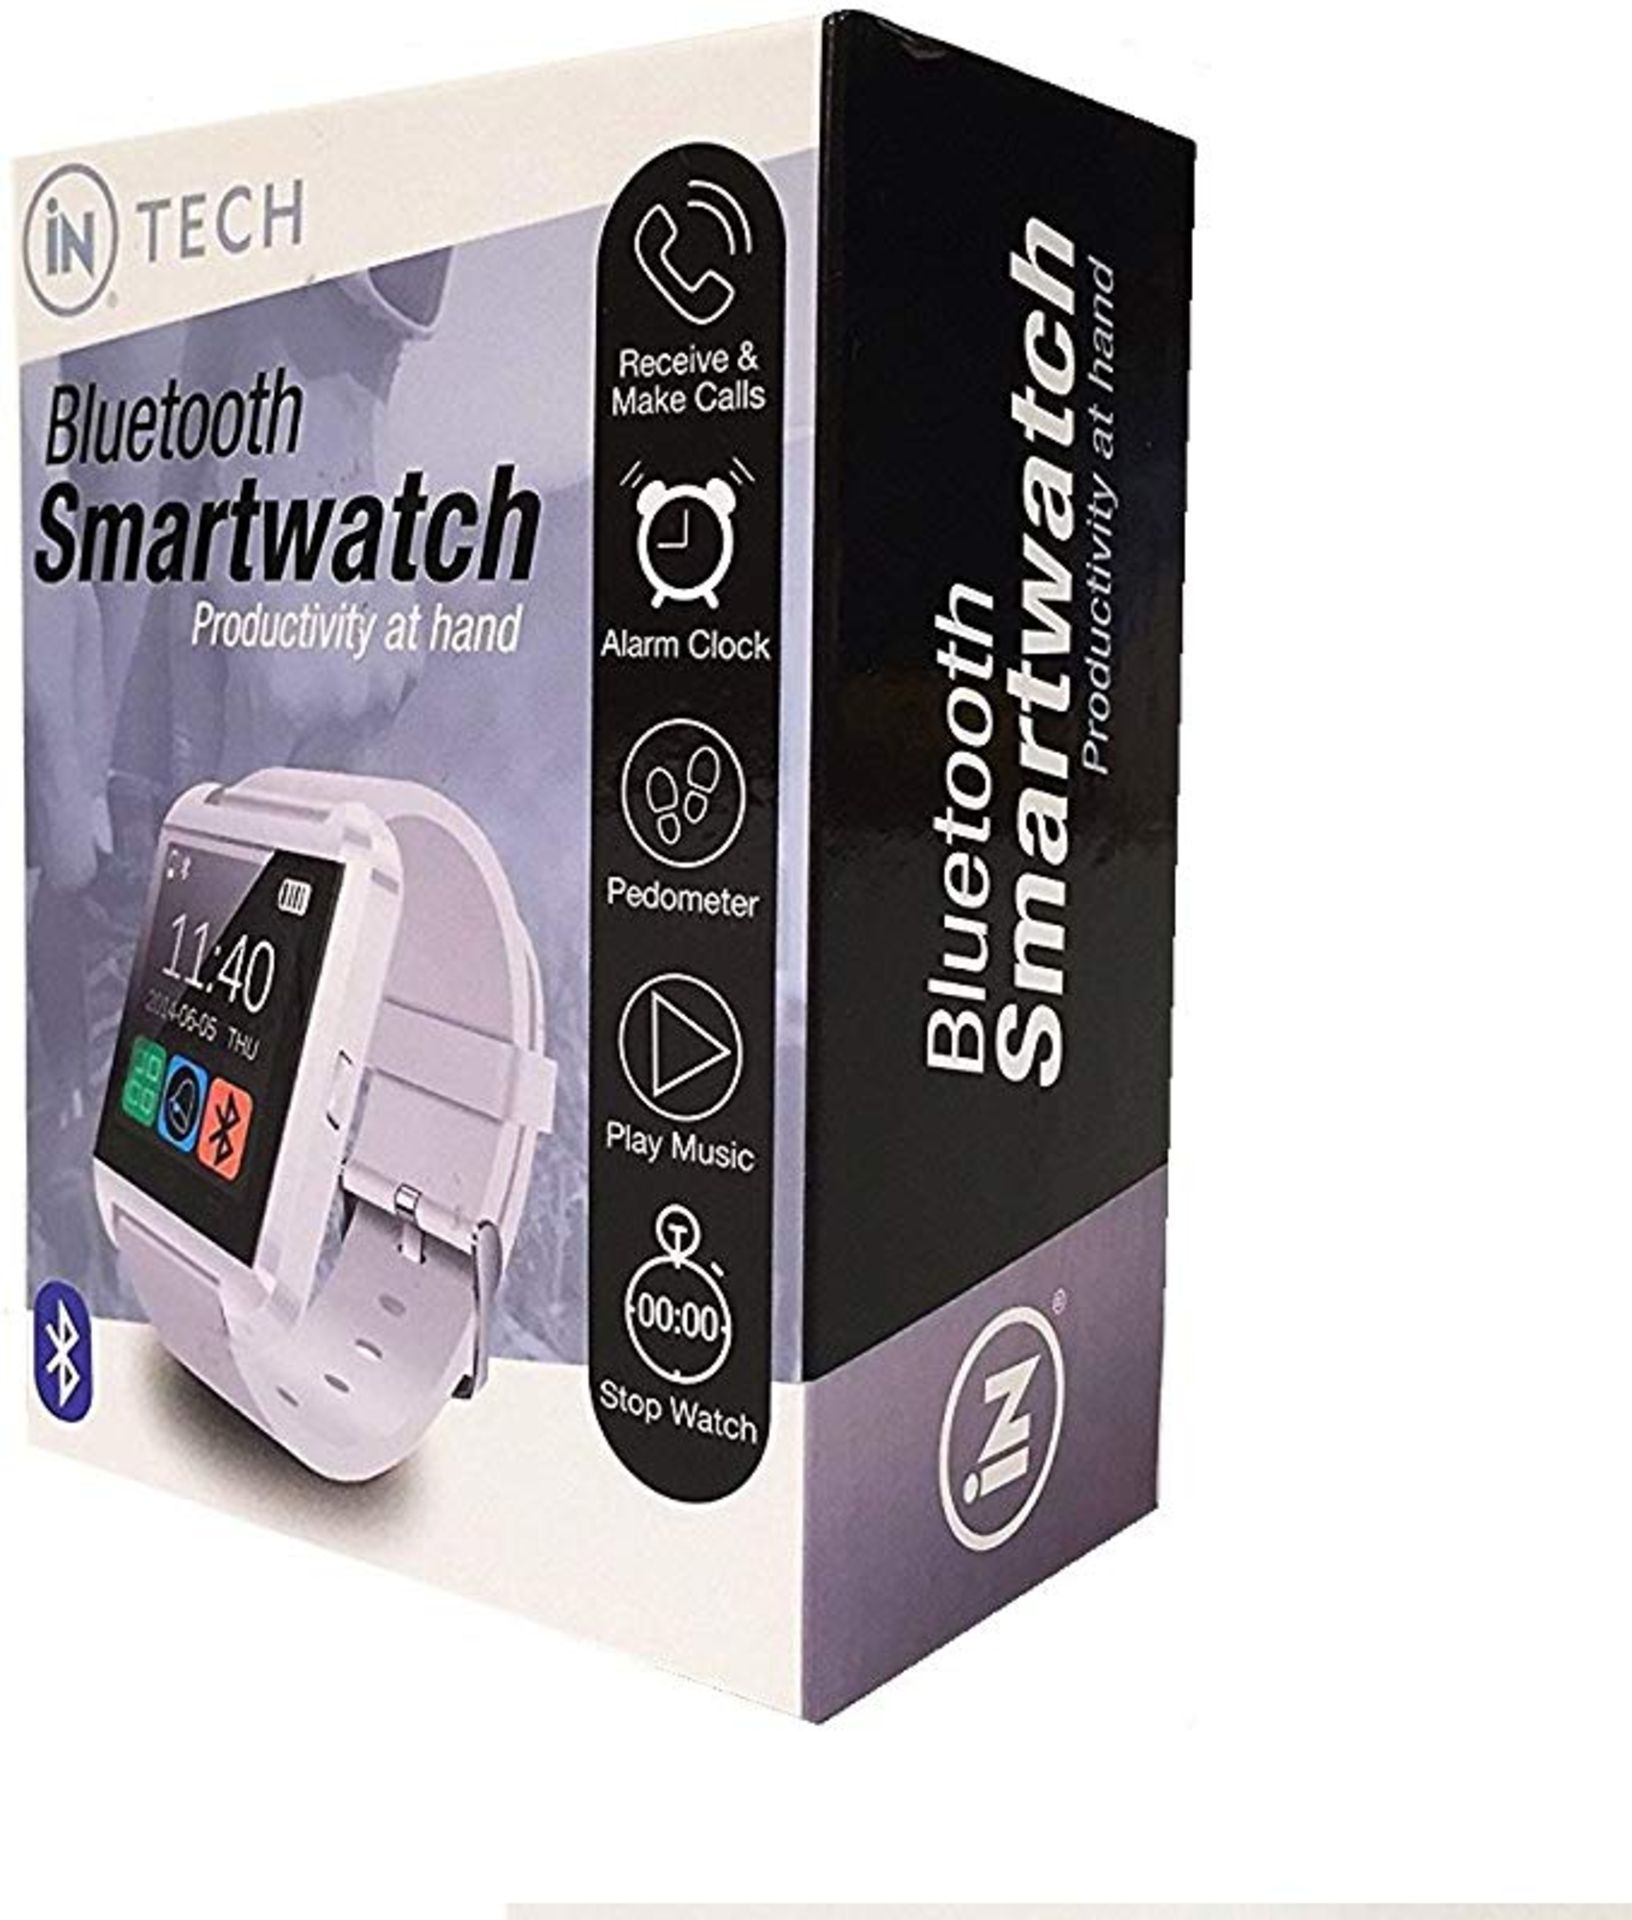 + VAT Brand New In Tech Bluetooth Smart Watch - Receive and Make Calls - Alarm Clock - Pedometer - - Image 2 of 4